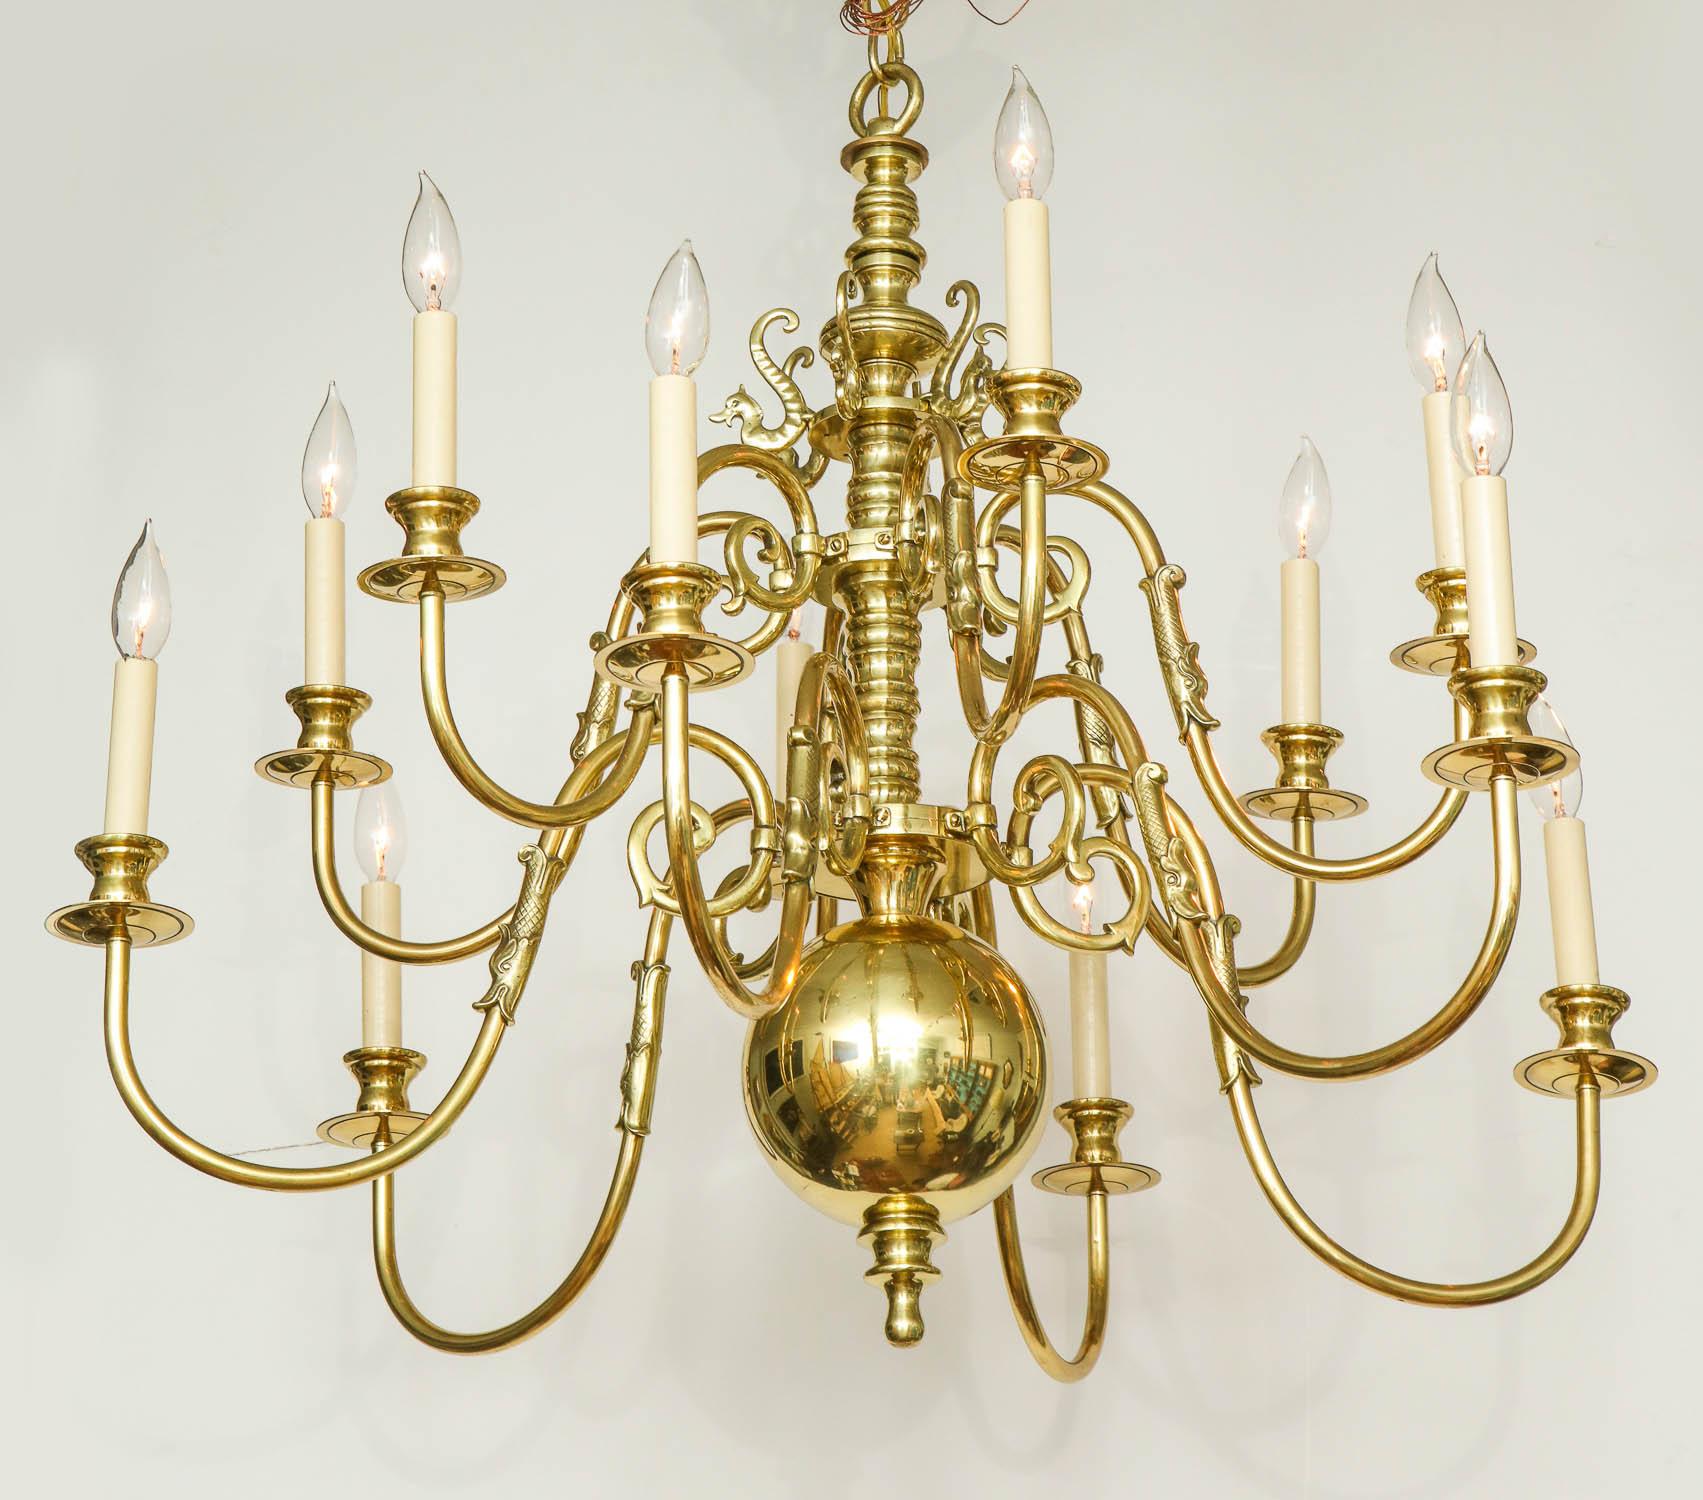 Fine Baroque style brass 12-light two-tier chandelier having balustrade turned shaft, the scrolled arms with dolphin spouts and overscale ball finial.